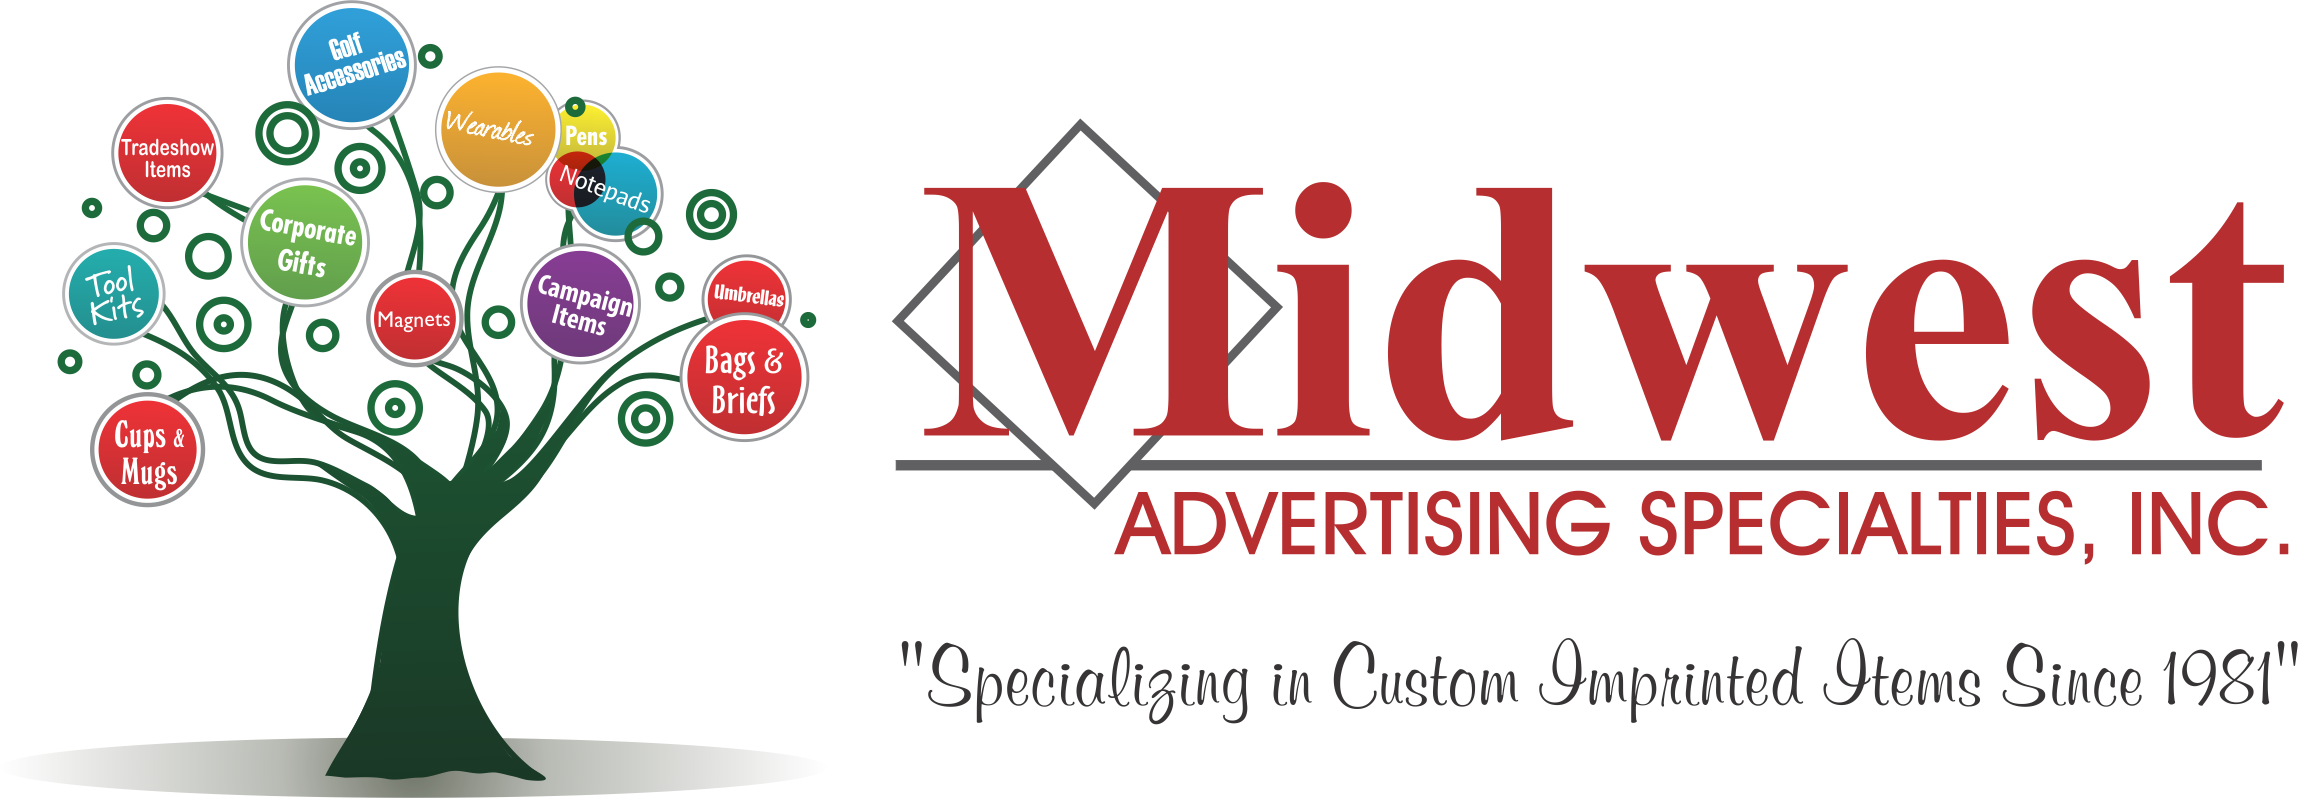 Midwest Advertising Specialties Inc